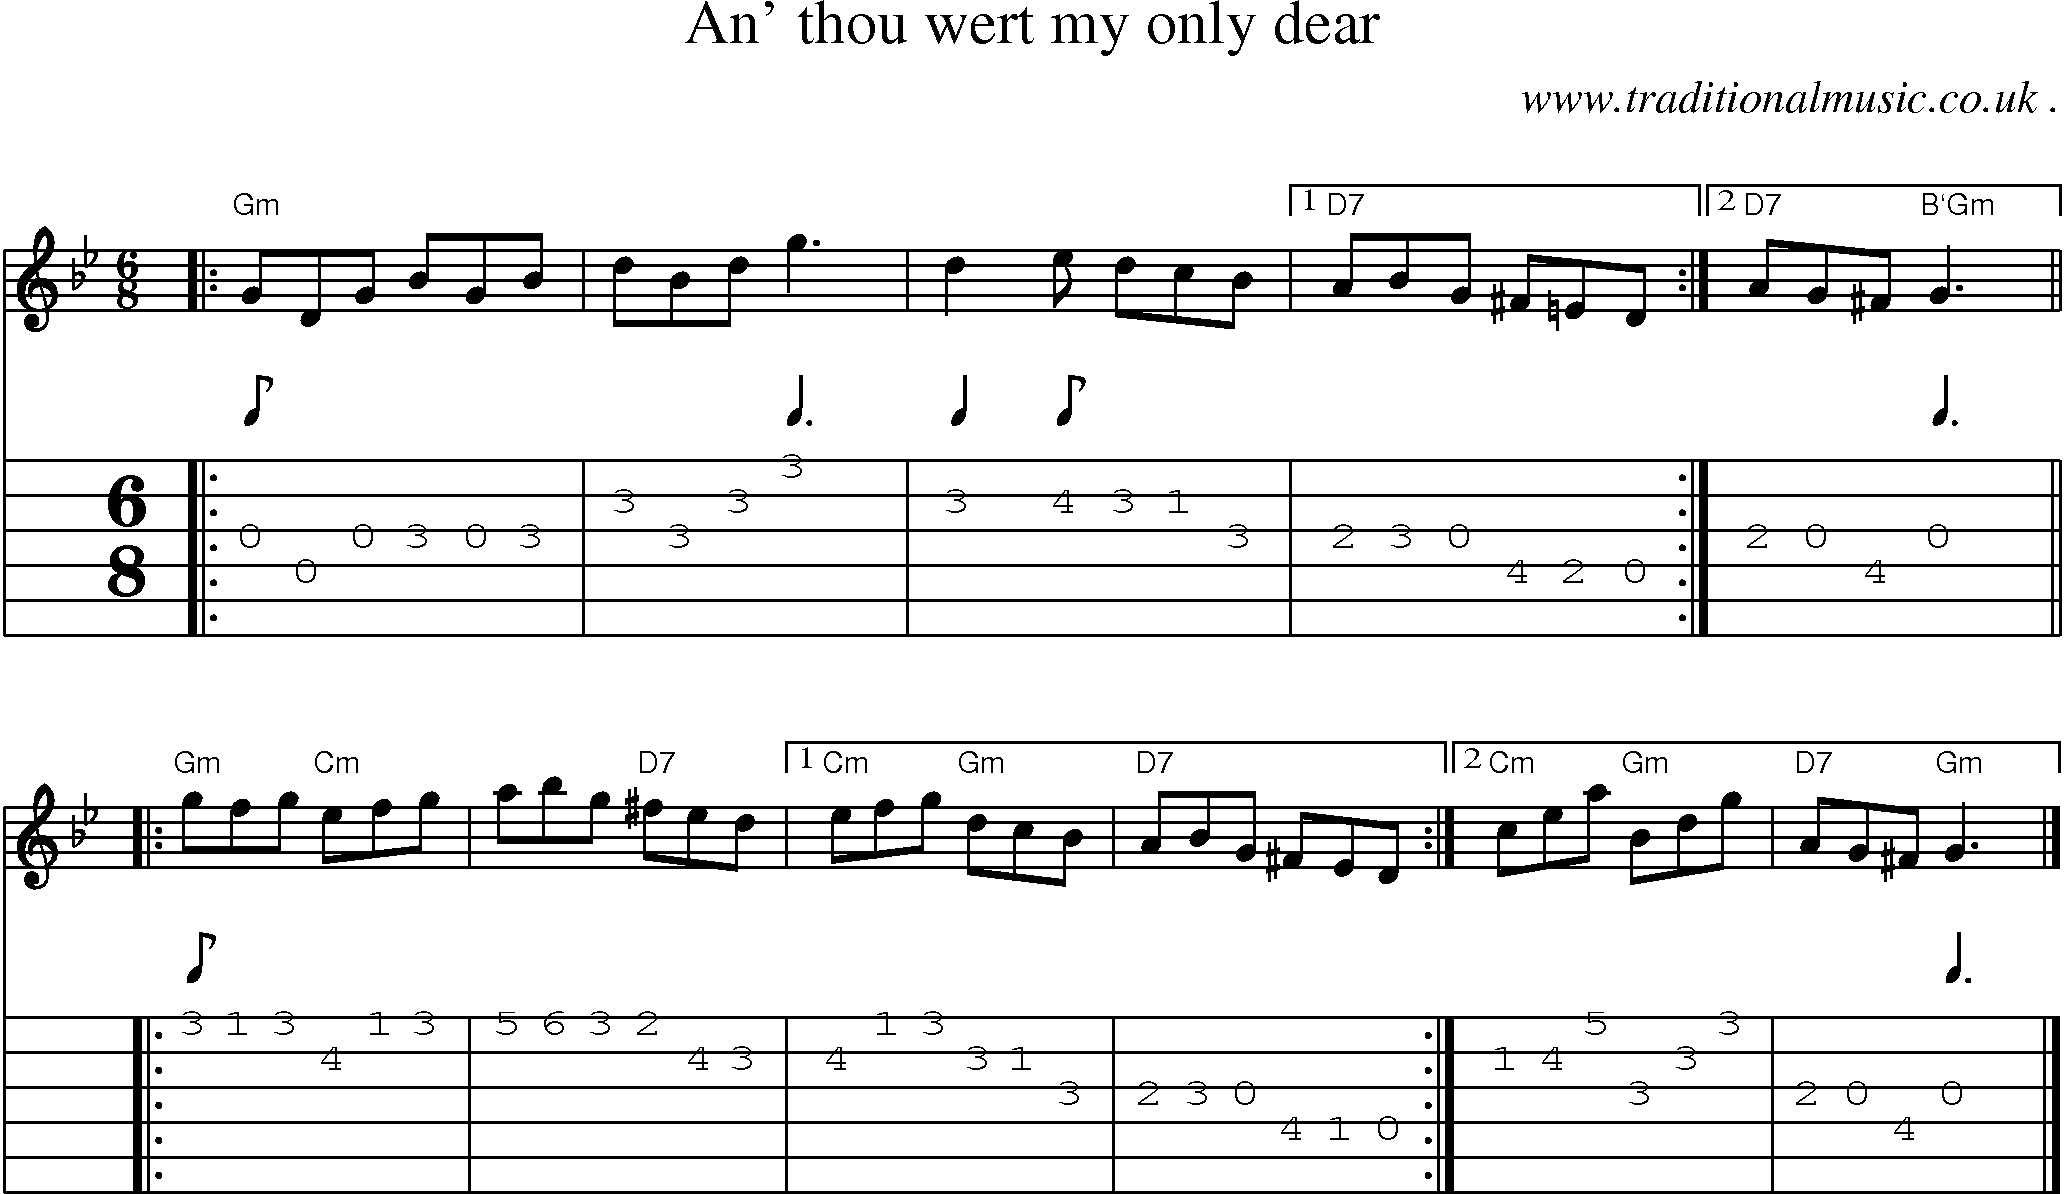 Sheet-music  score, Chords and Guitar Tabs for An Thou Wert My Only Dear